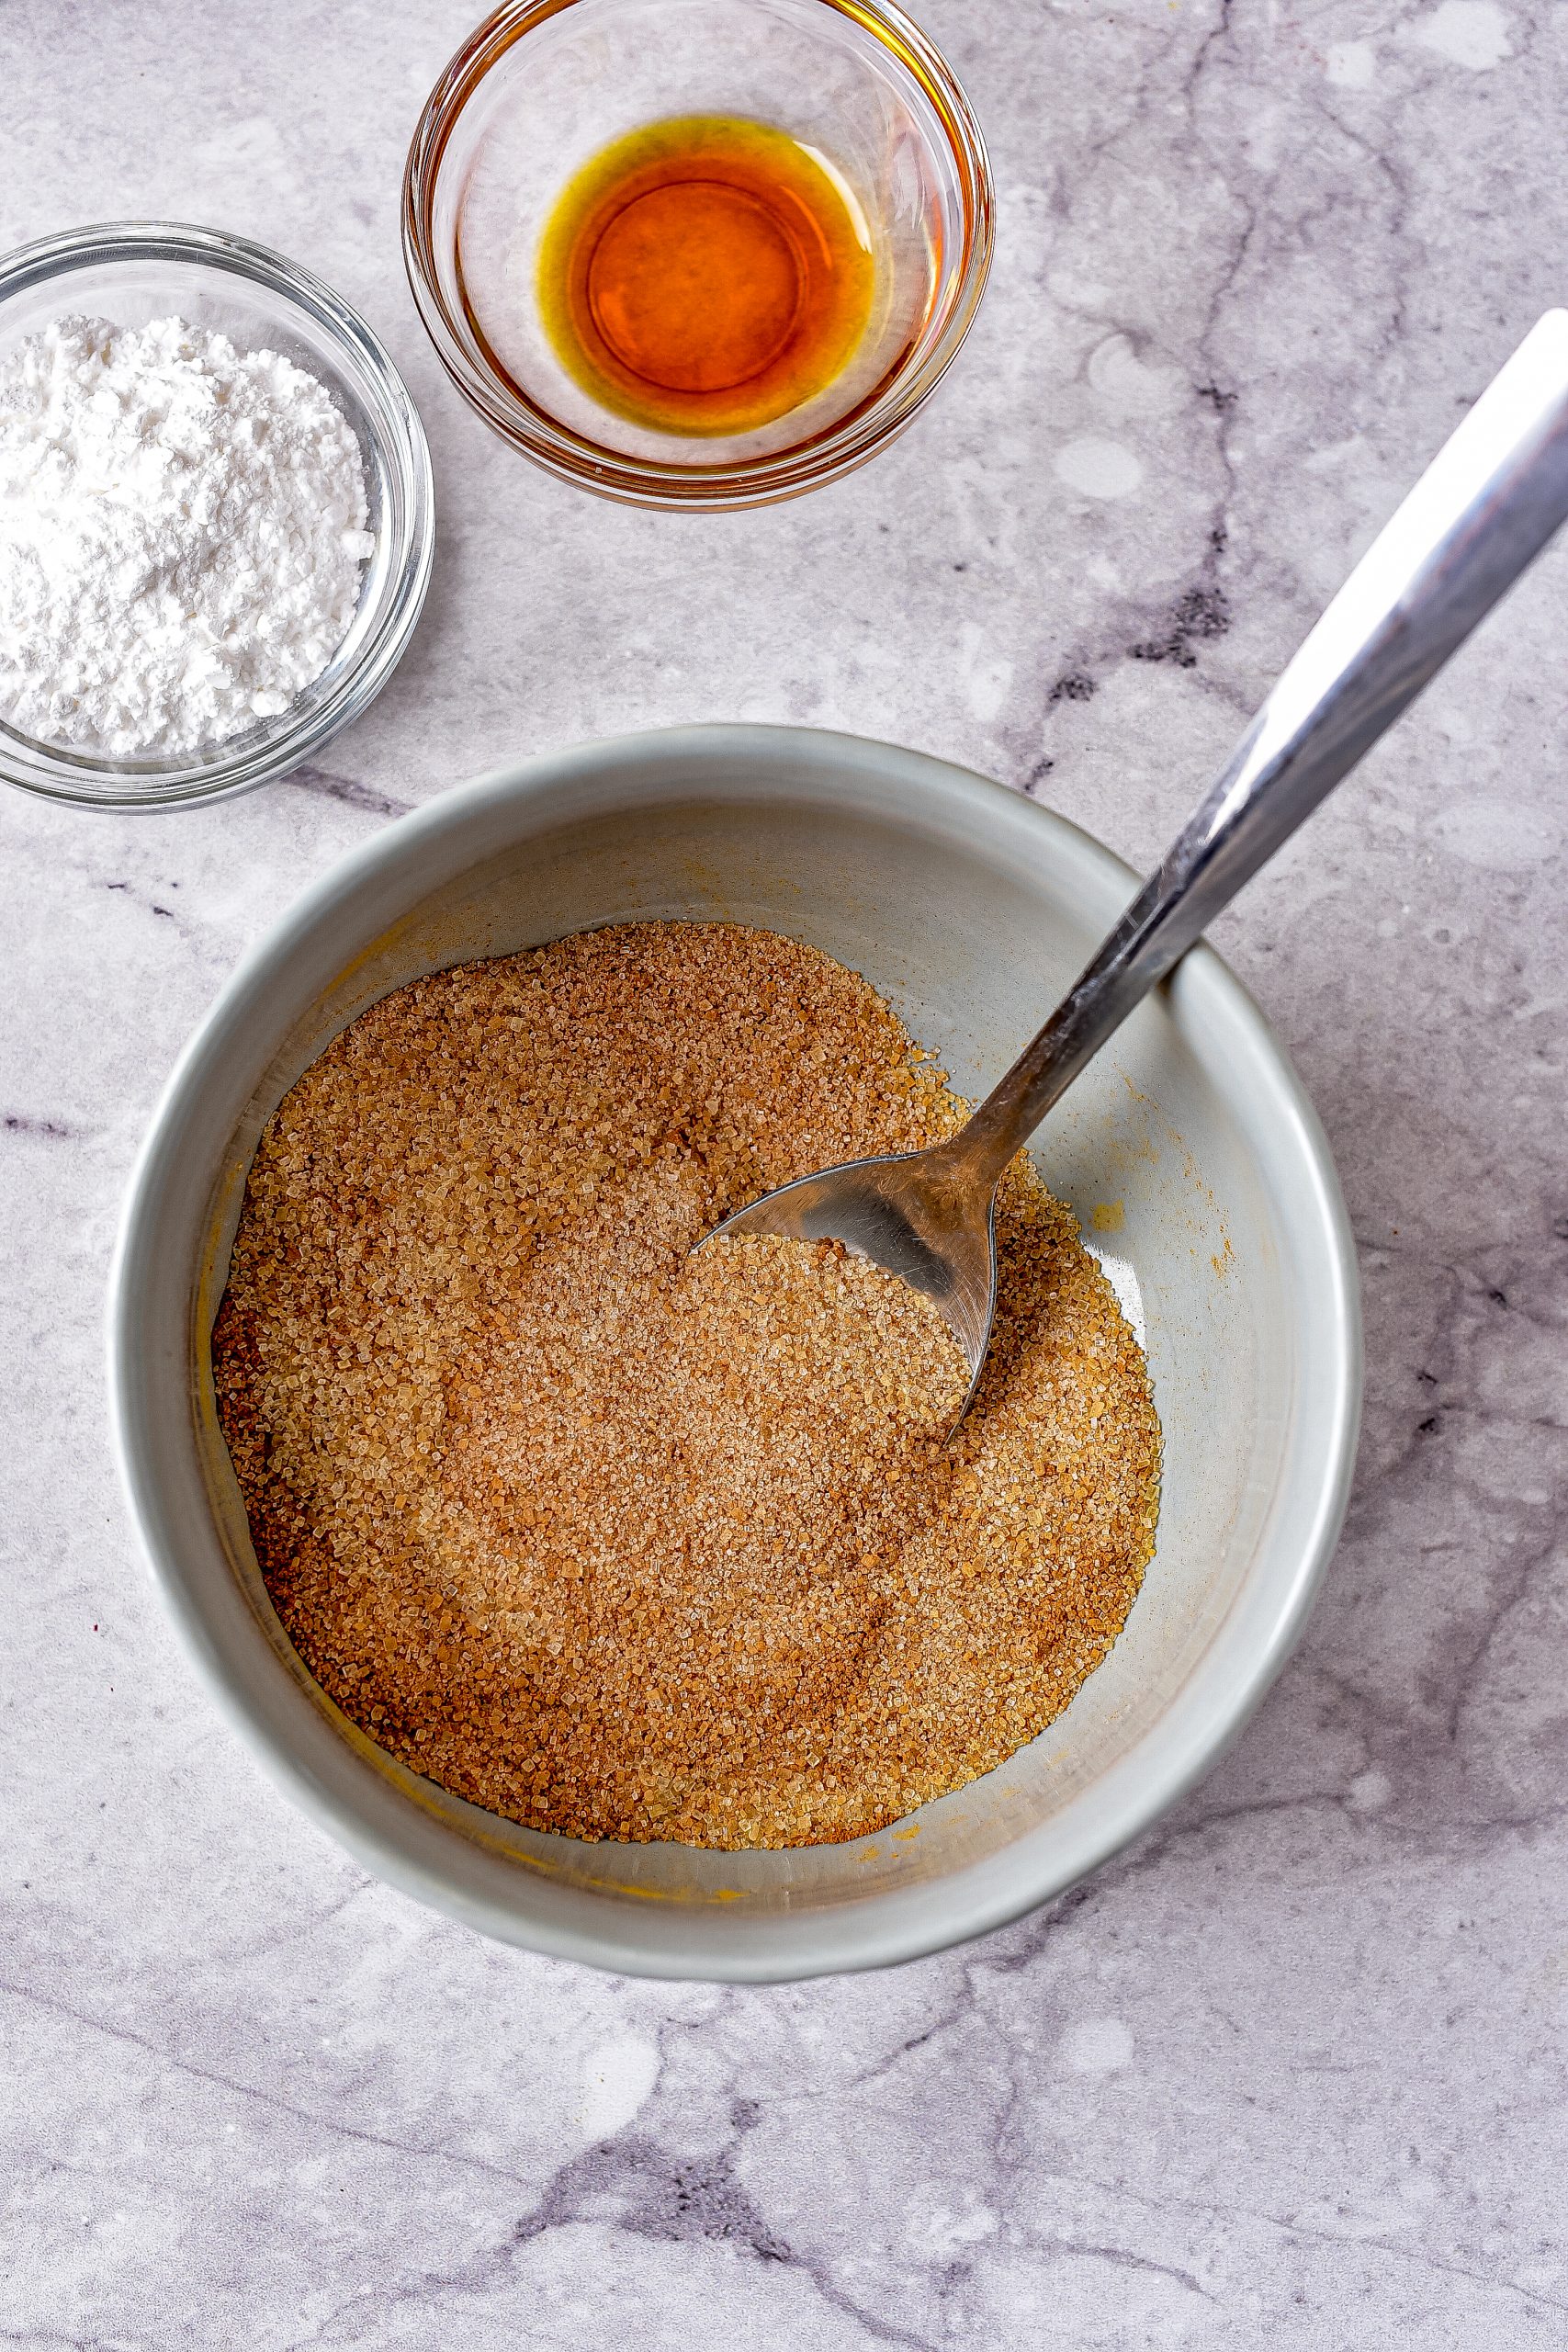 in a bowl, combine the brown sugar, cinnamon, and nutmeg.